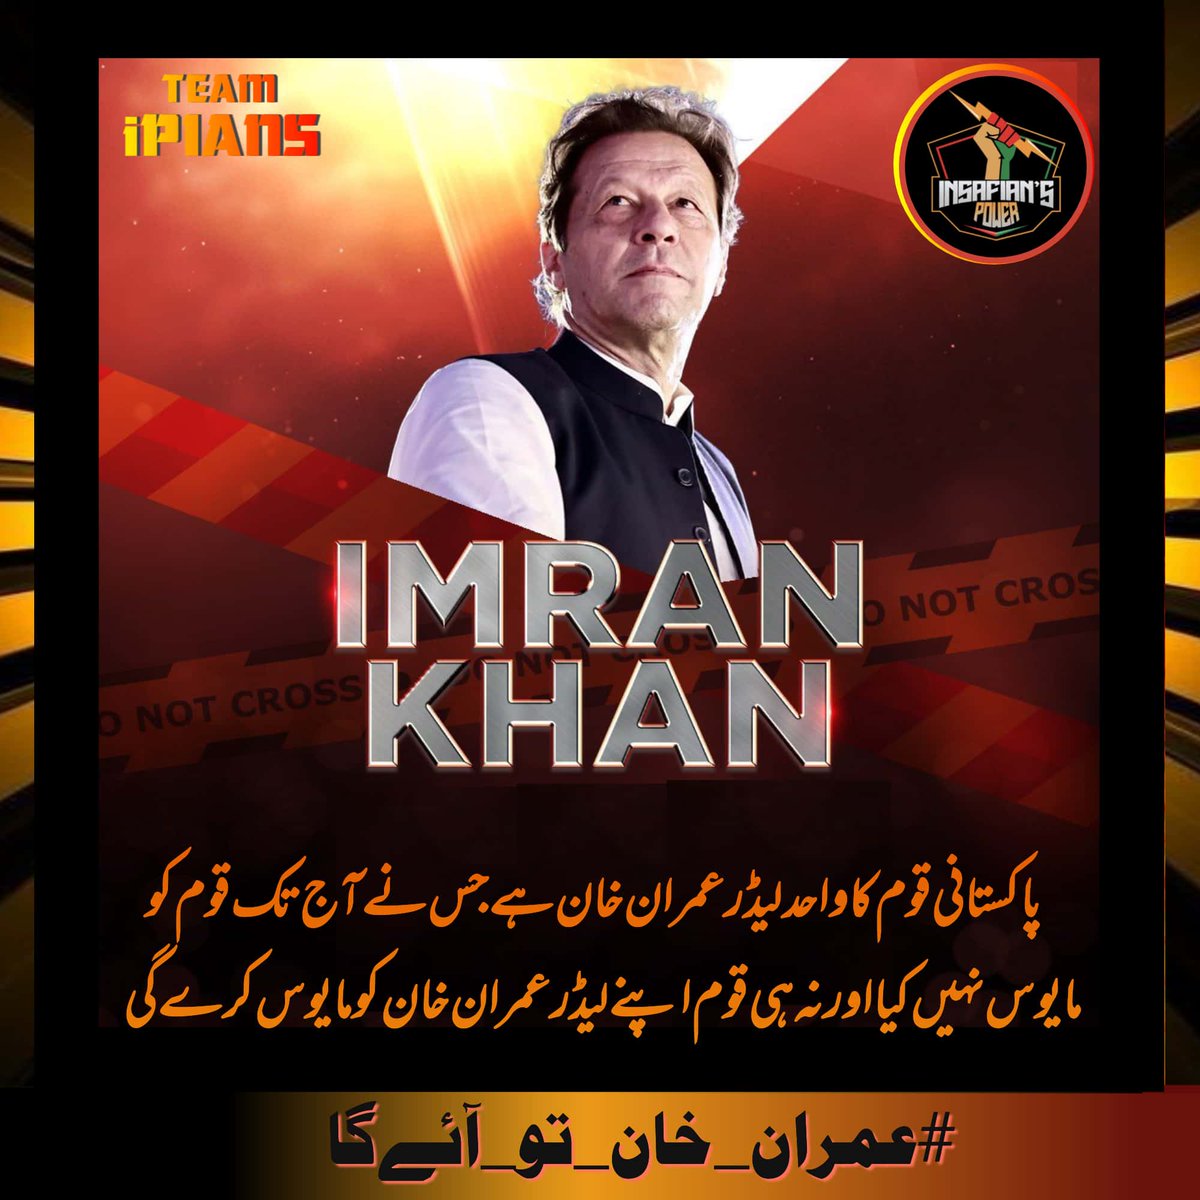 When Imran Khan left the PM office last year, we knew he'd be back. And now, after months of hard work and determination, he's about to make a triumphant return to power!
@TeamiPians 
#عمران_خان_تو_آئےگا